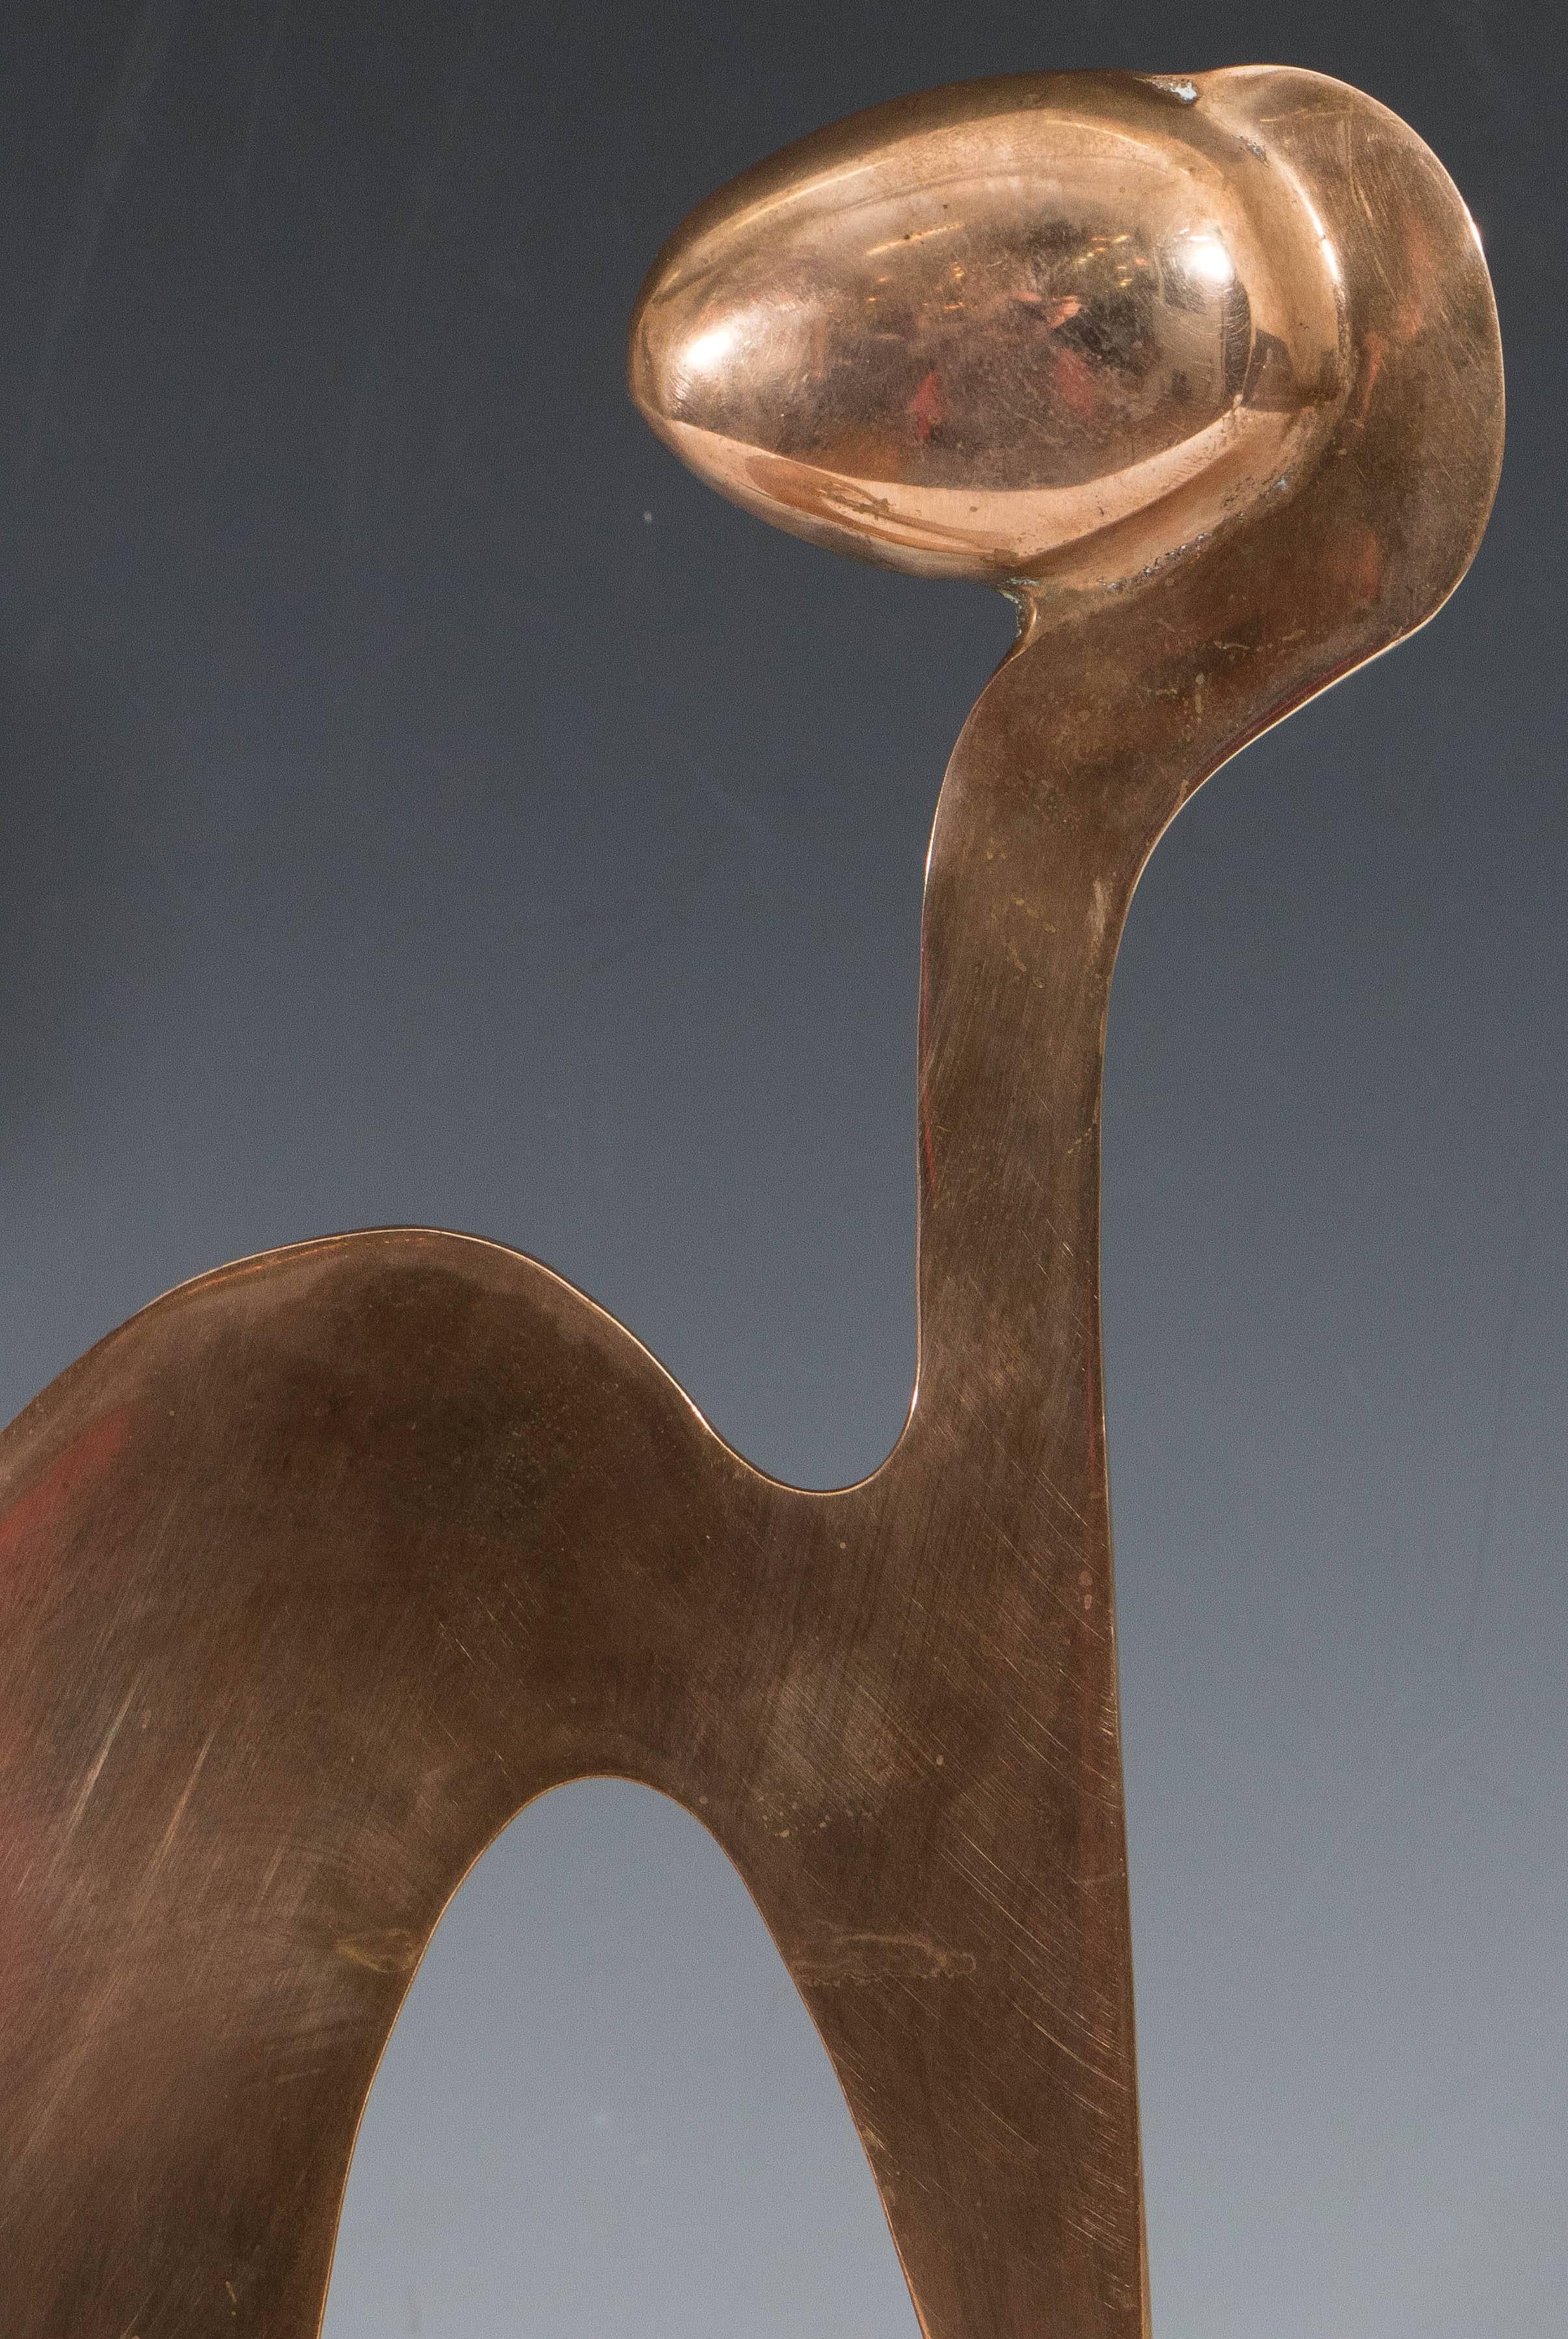 An abstract sculpture of a reclining figure in polished brass, by collaborating artists Arleen Eichengreen and Nancy Gensburg, circa 1970s. The structure of this sculpture, rounded head over a contorted flattened body, creates a fascinating sense of